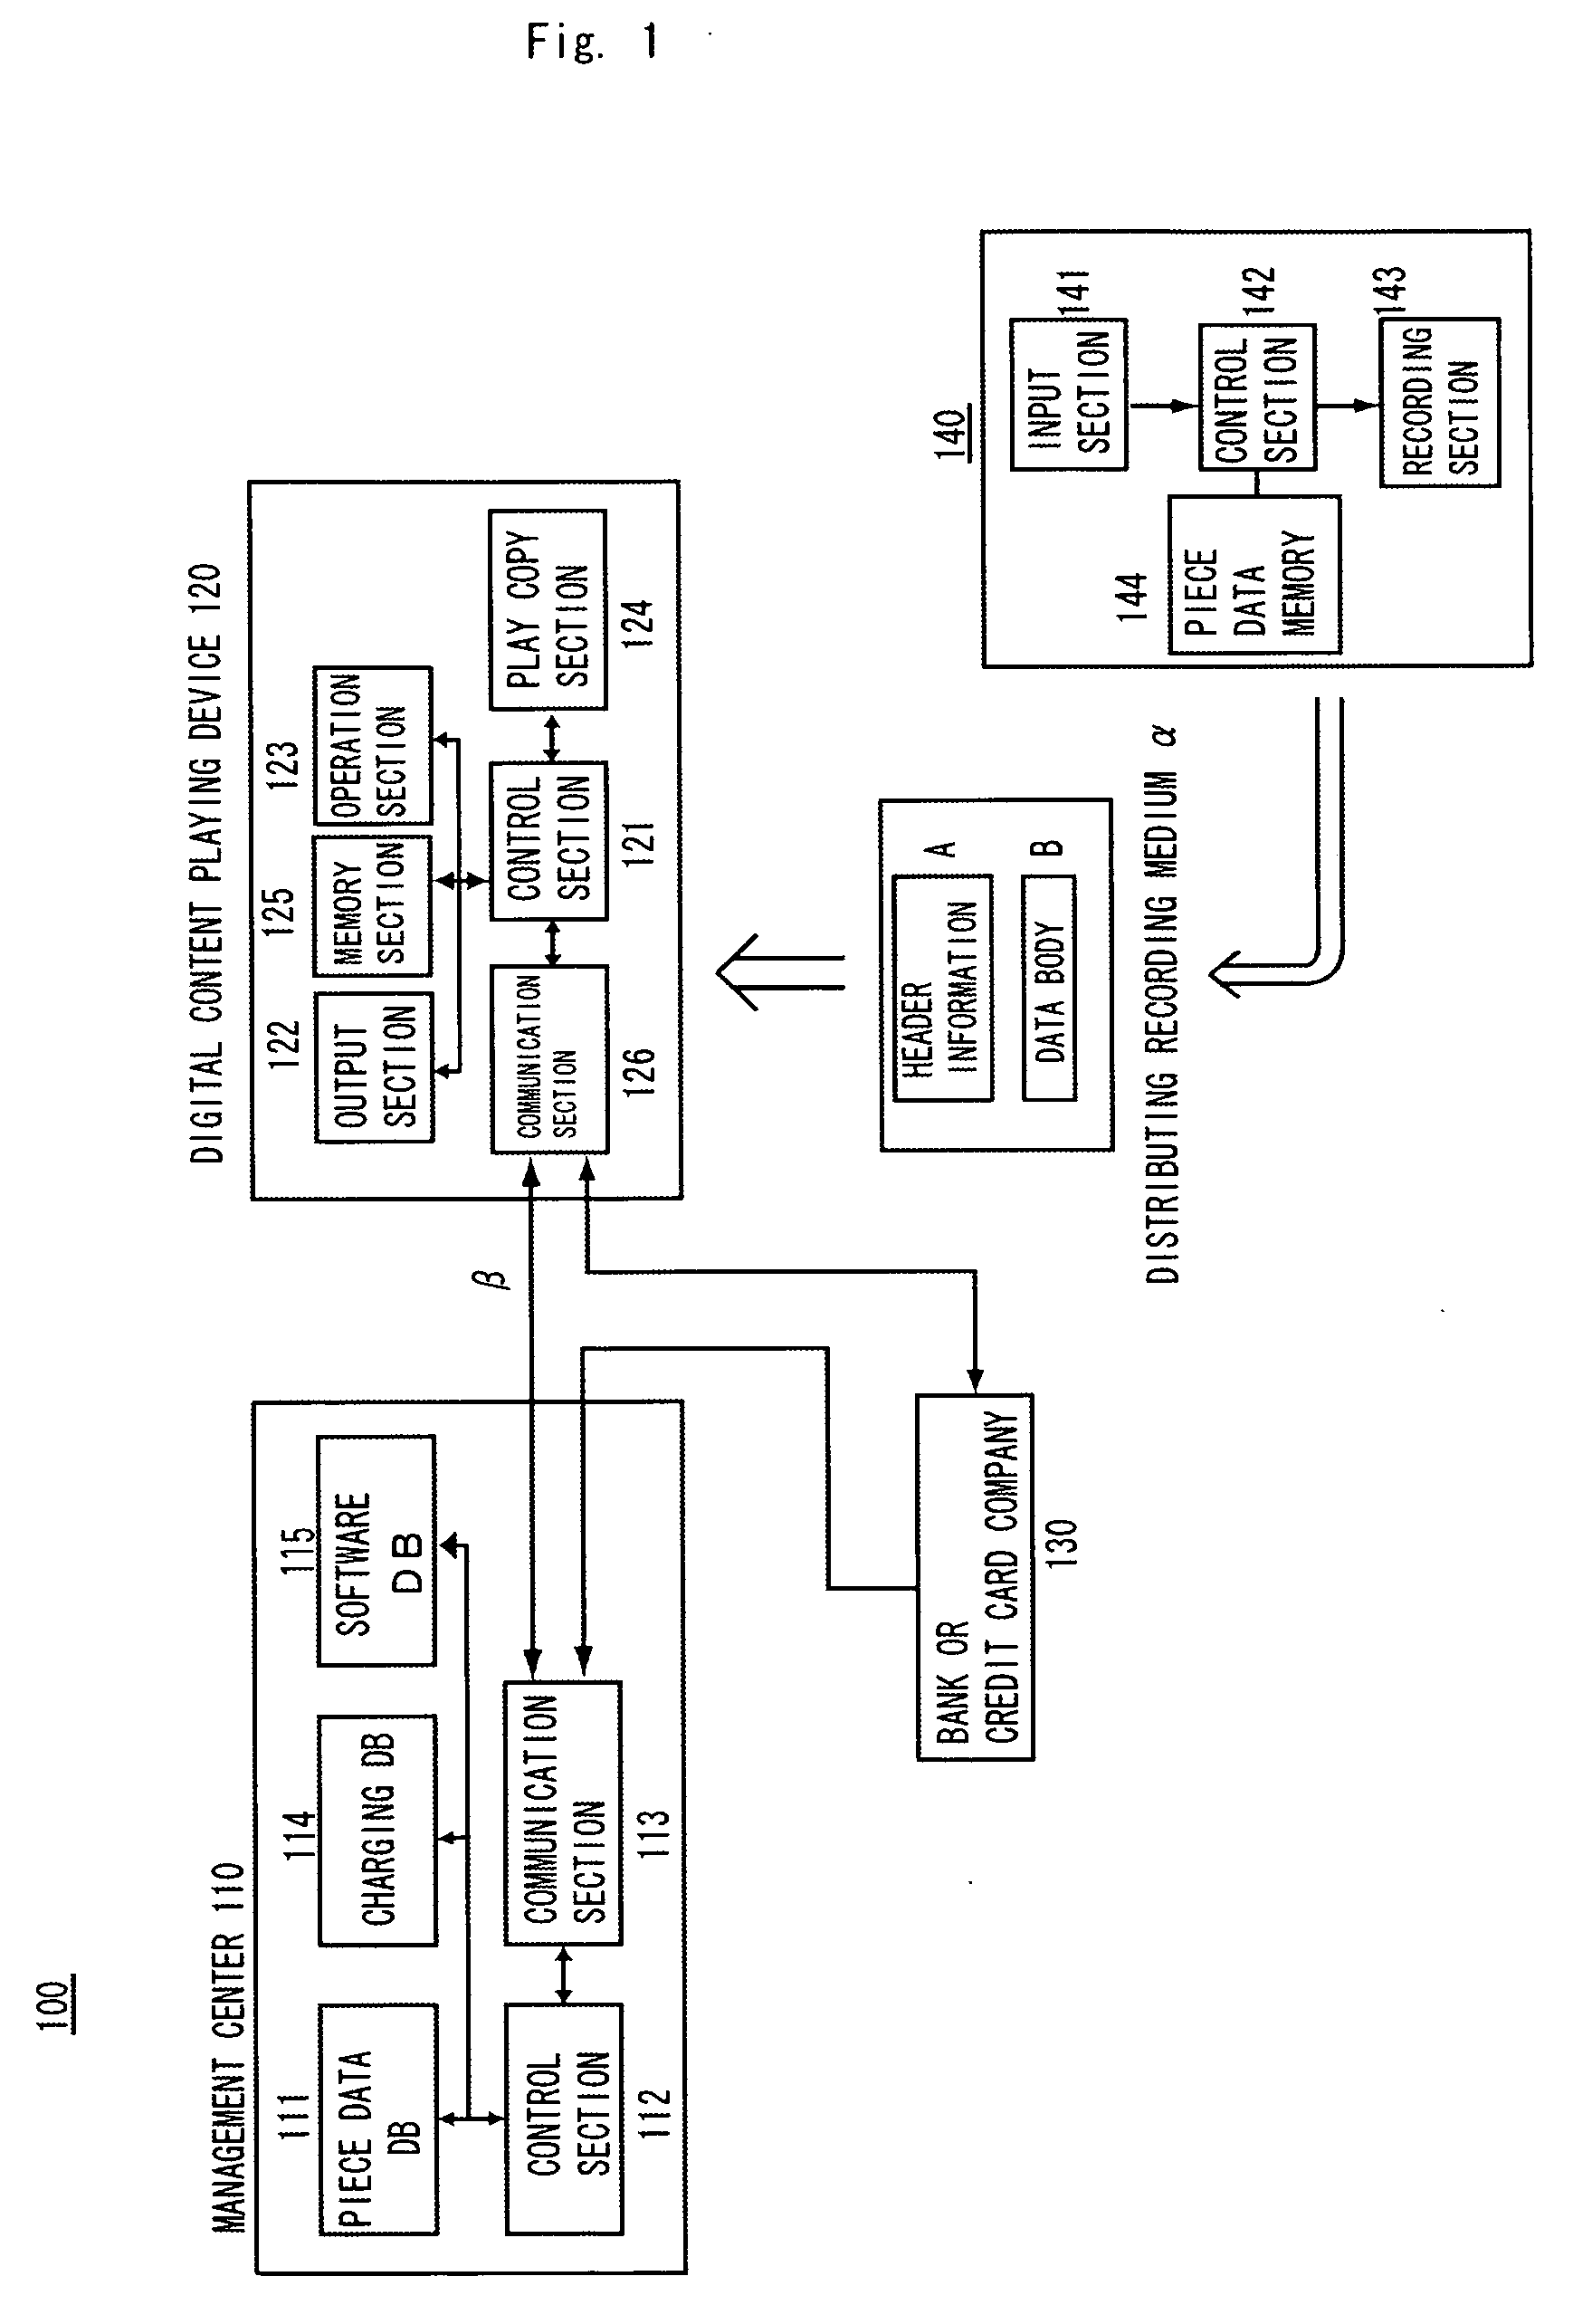 System for preventing unauthorized use of digital content